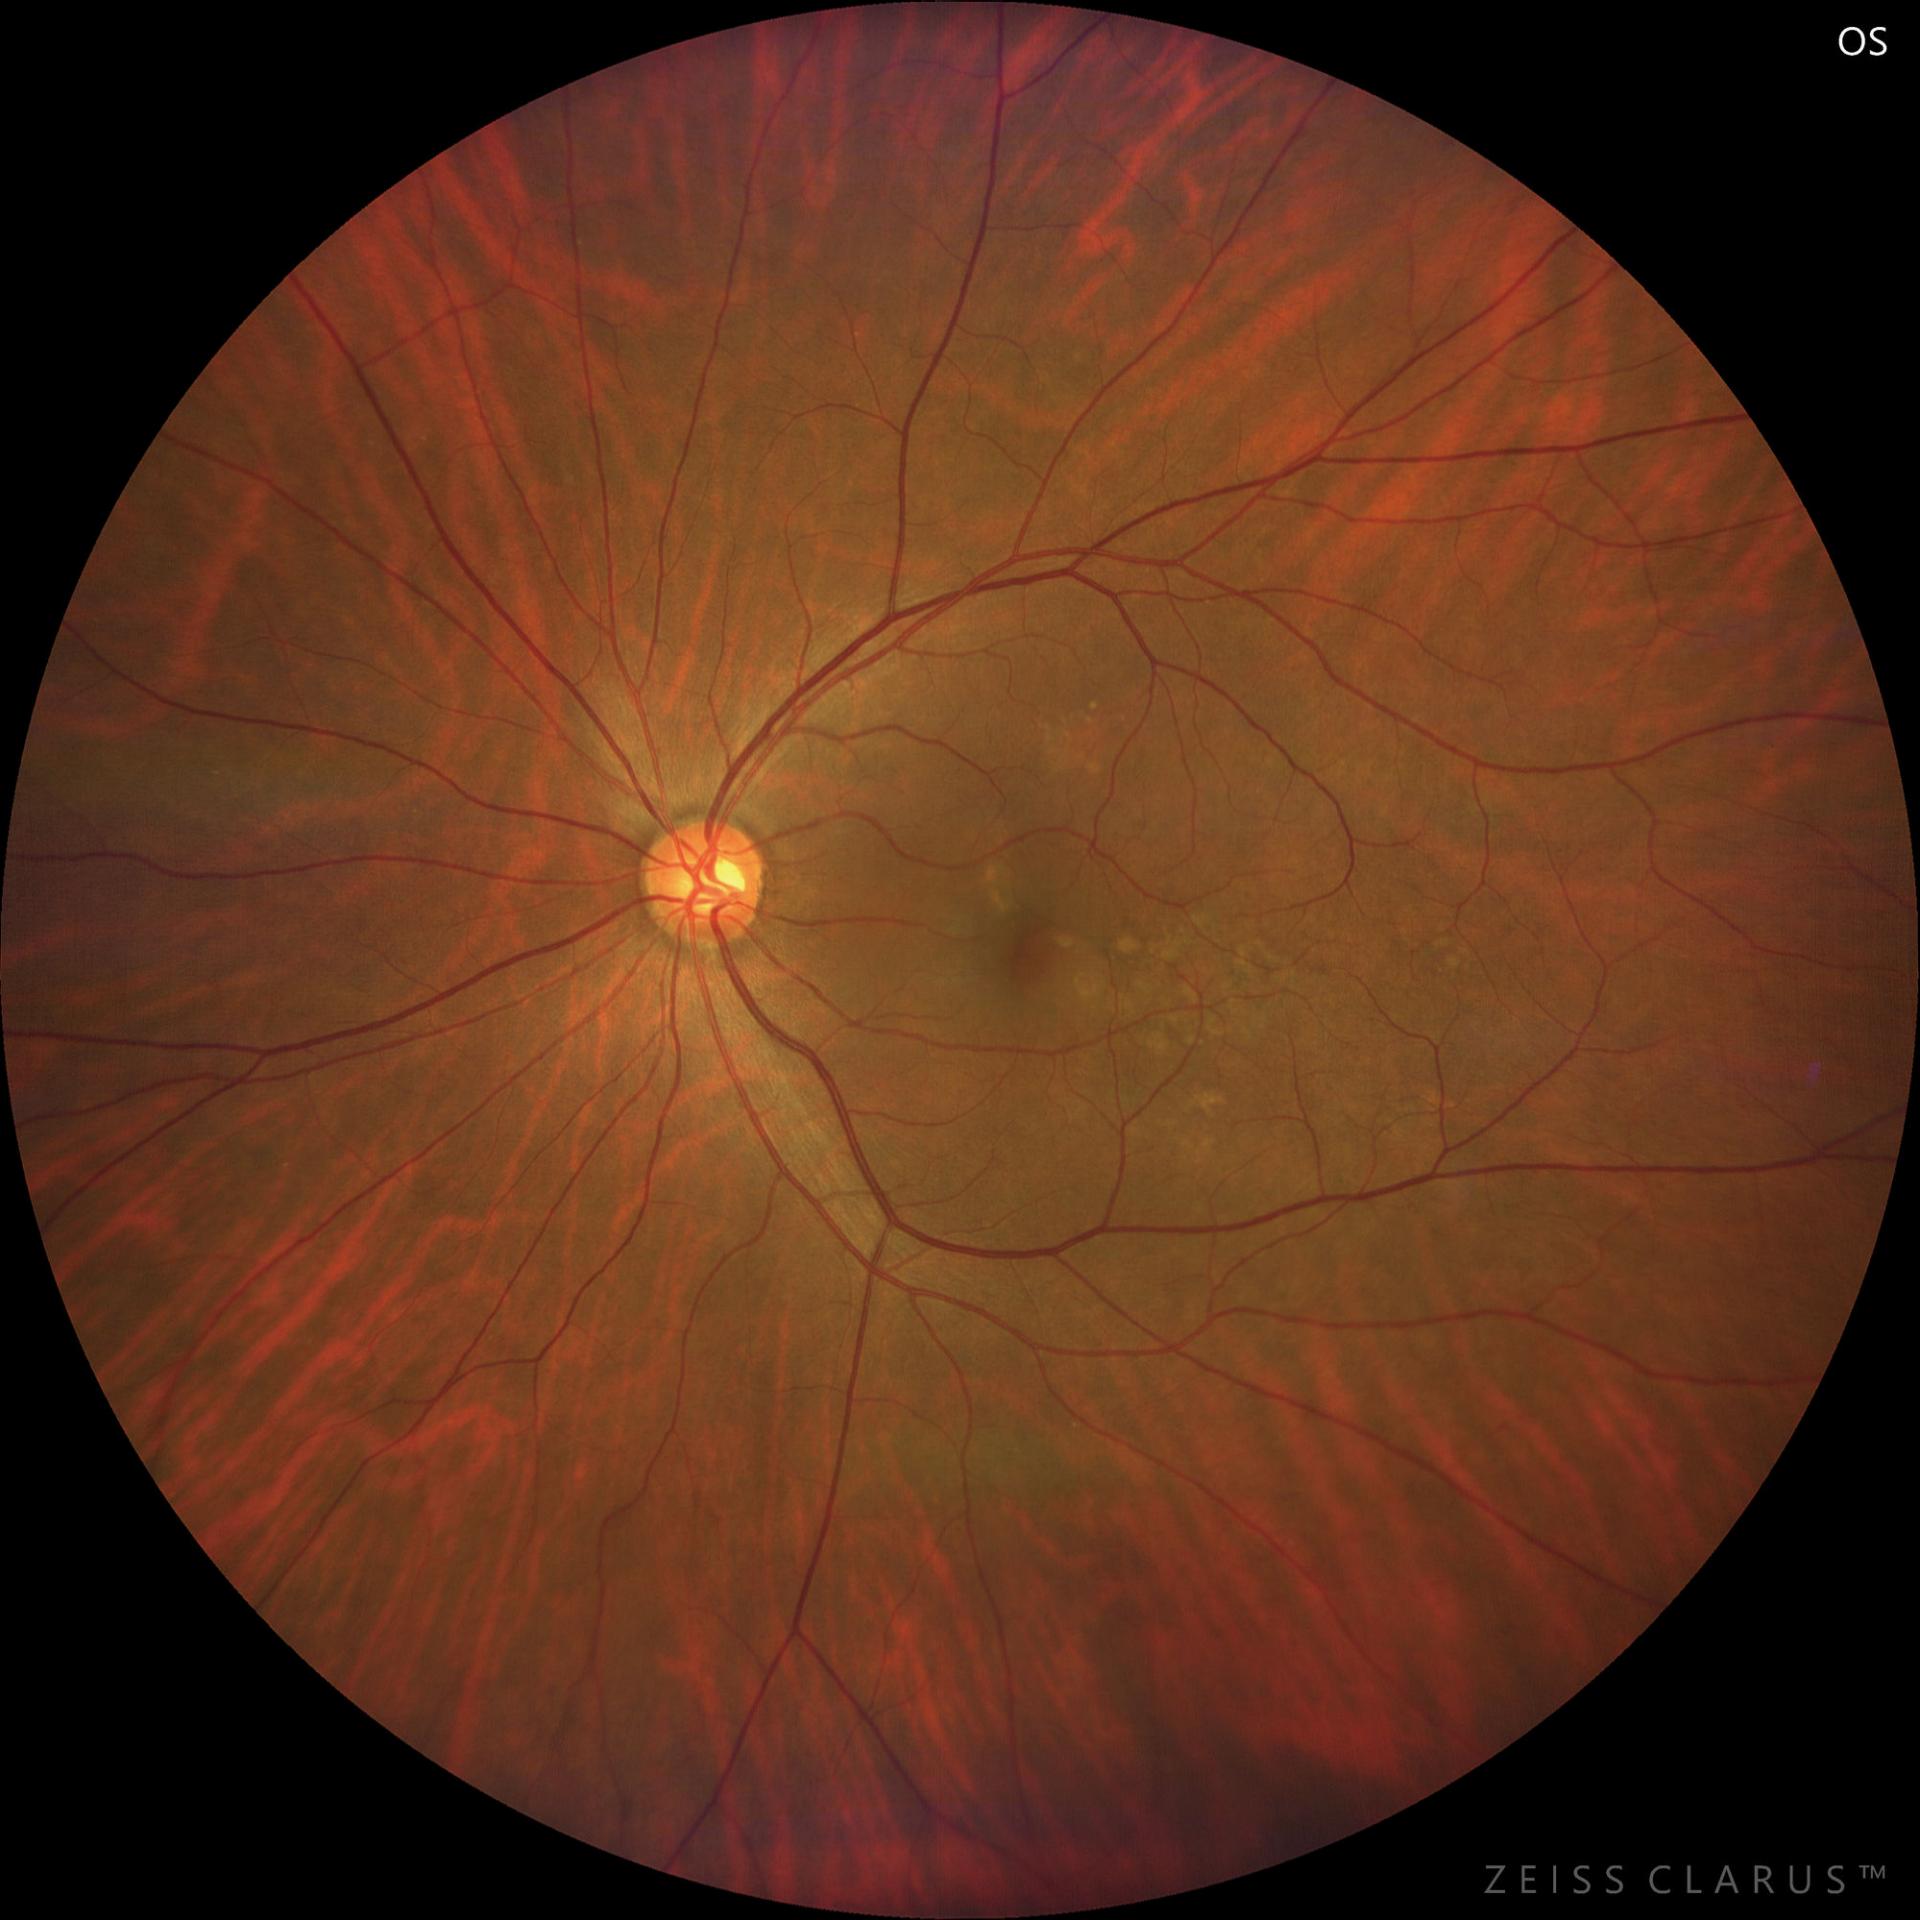 WF 133° magnified image of the macula